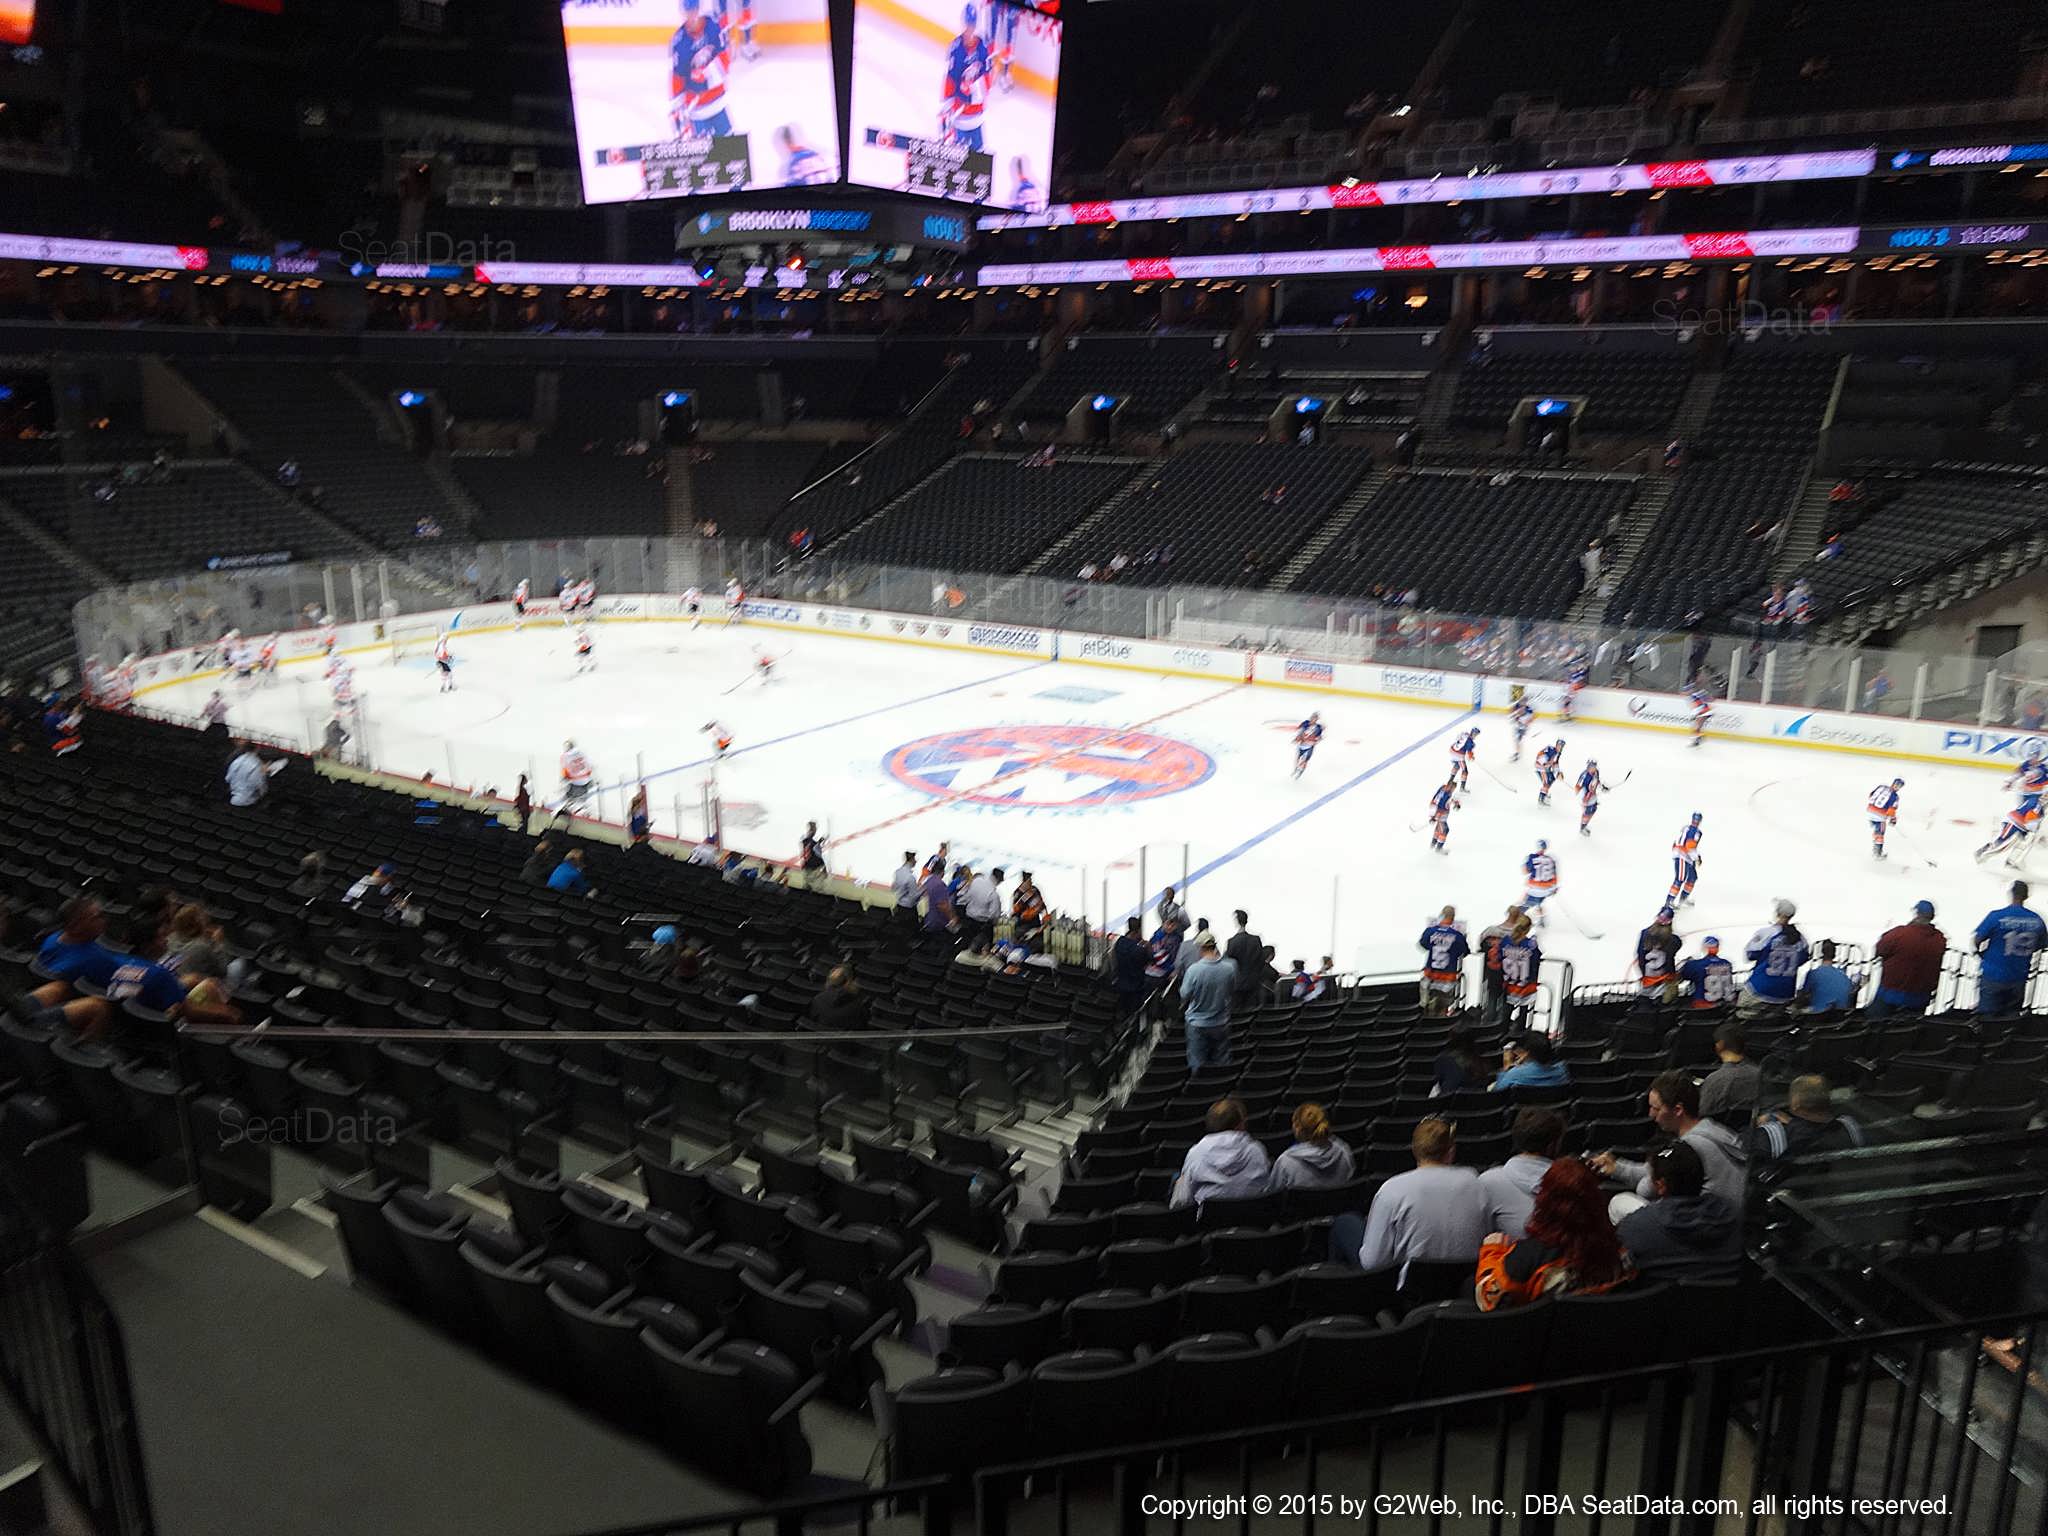 Seat View from Section 105 at the Barclays Center, home of the New York Islanders